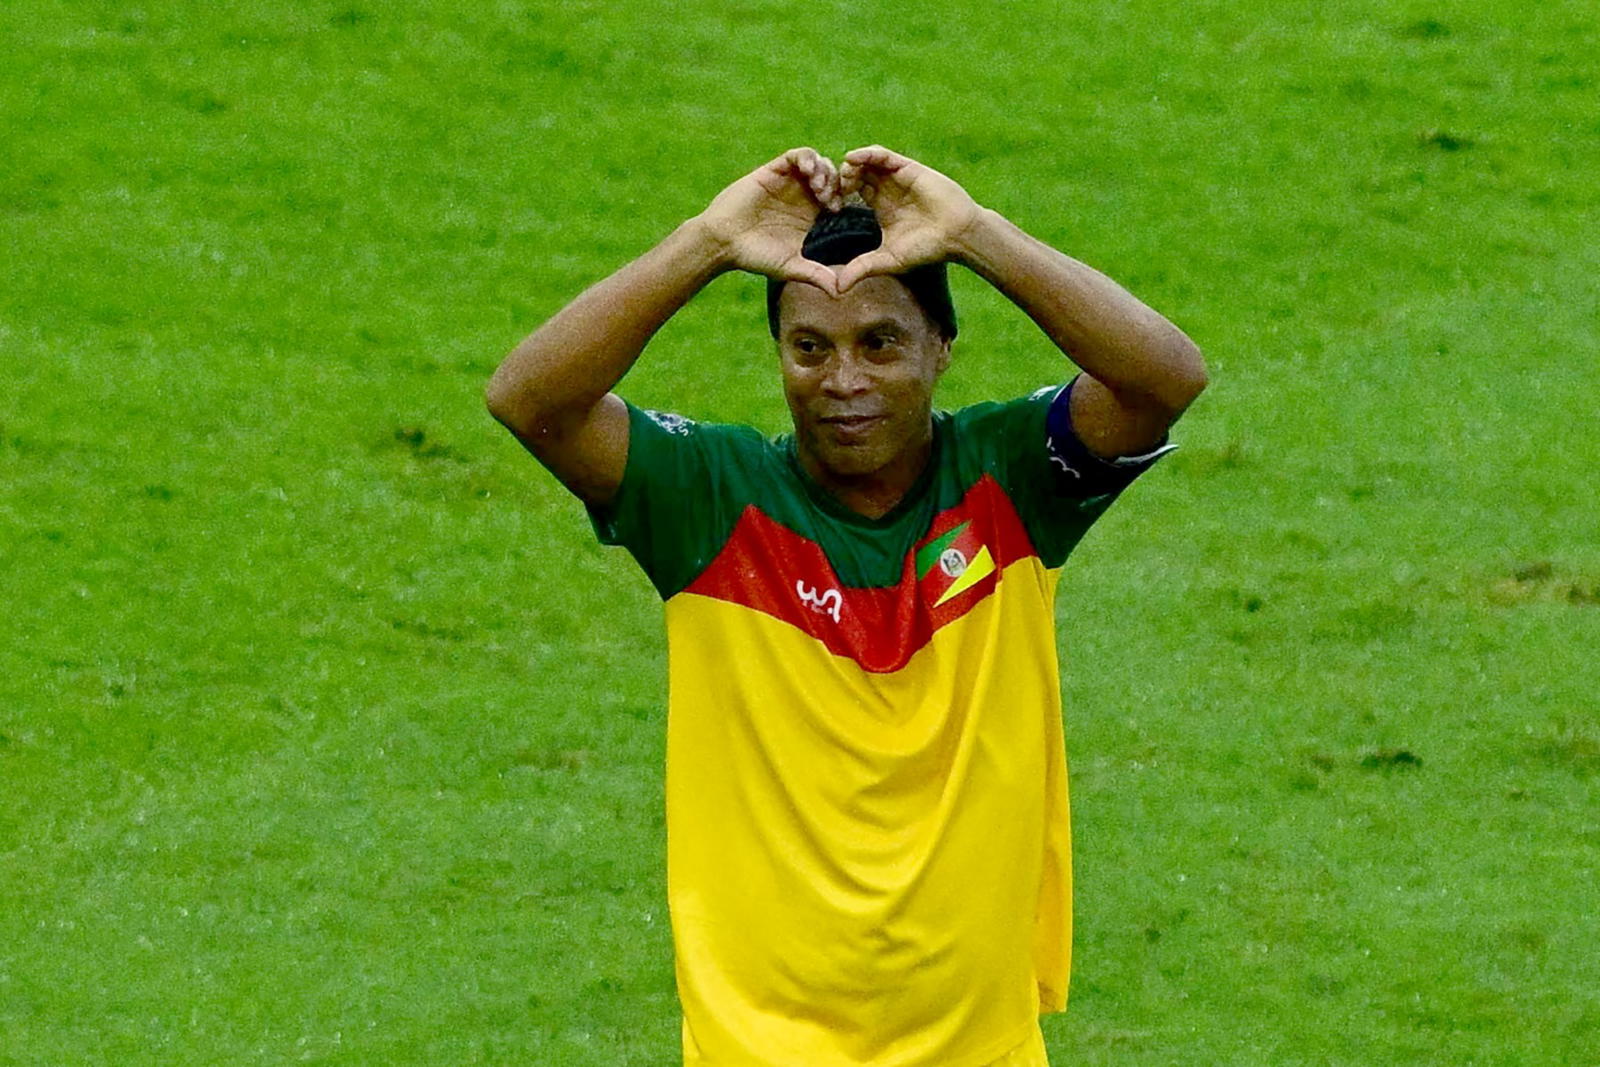 Photos: Brazil’s Ronaldinho dazzles in charity match for flood victims